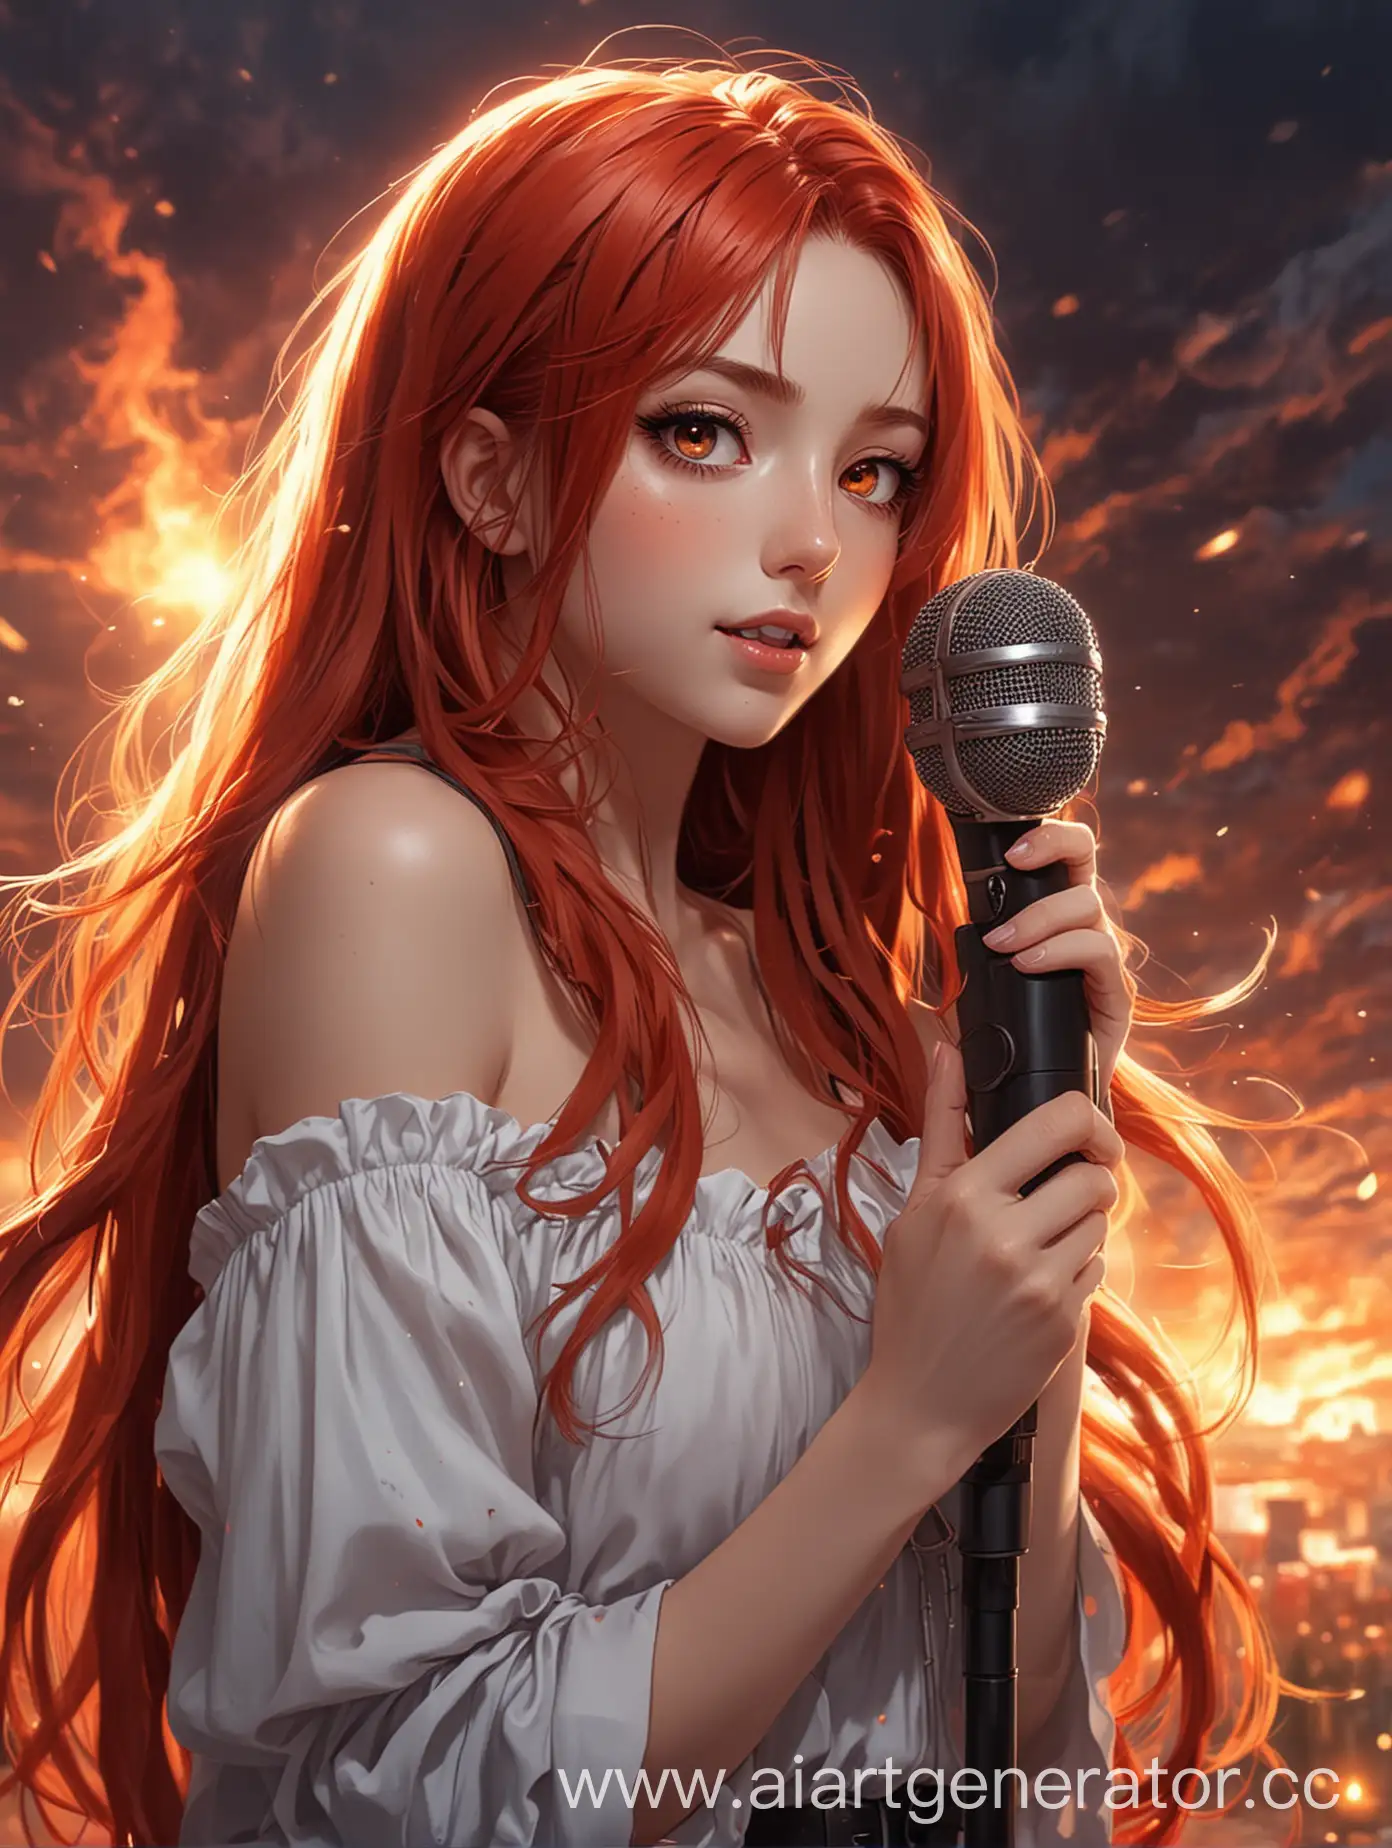 Anime-Girl-Singing-with-a-Microphone-in-Romantic-Sunset-Scenery